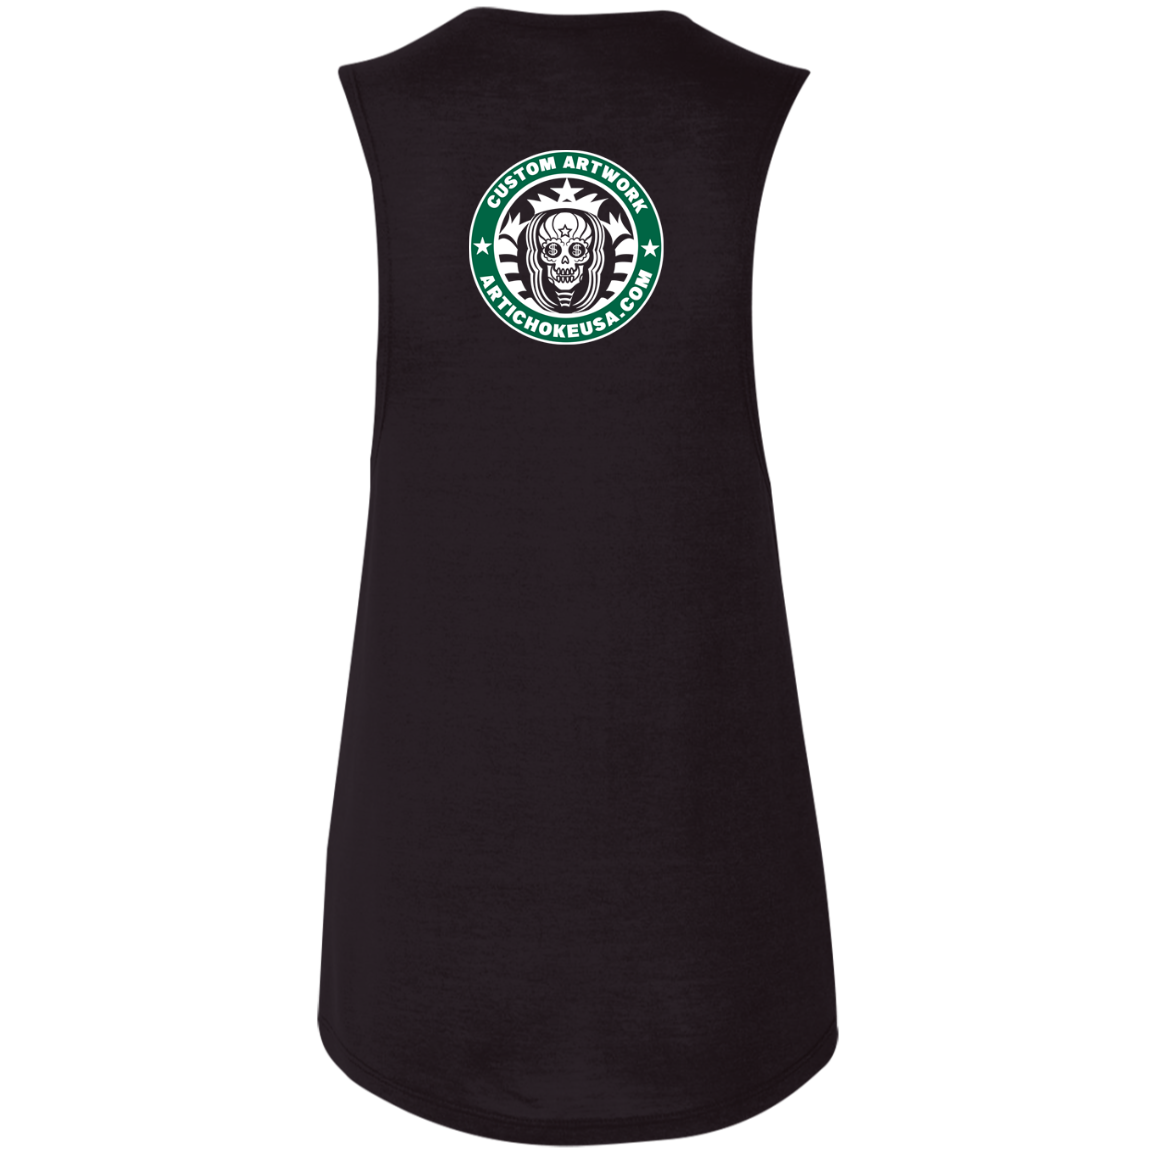 ArtichokeUSA Custom Design. Money Can't Buy Happiness But It Can Buy You Coffee. Ladies' Flowy Muscle Tank